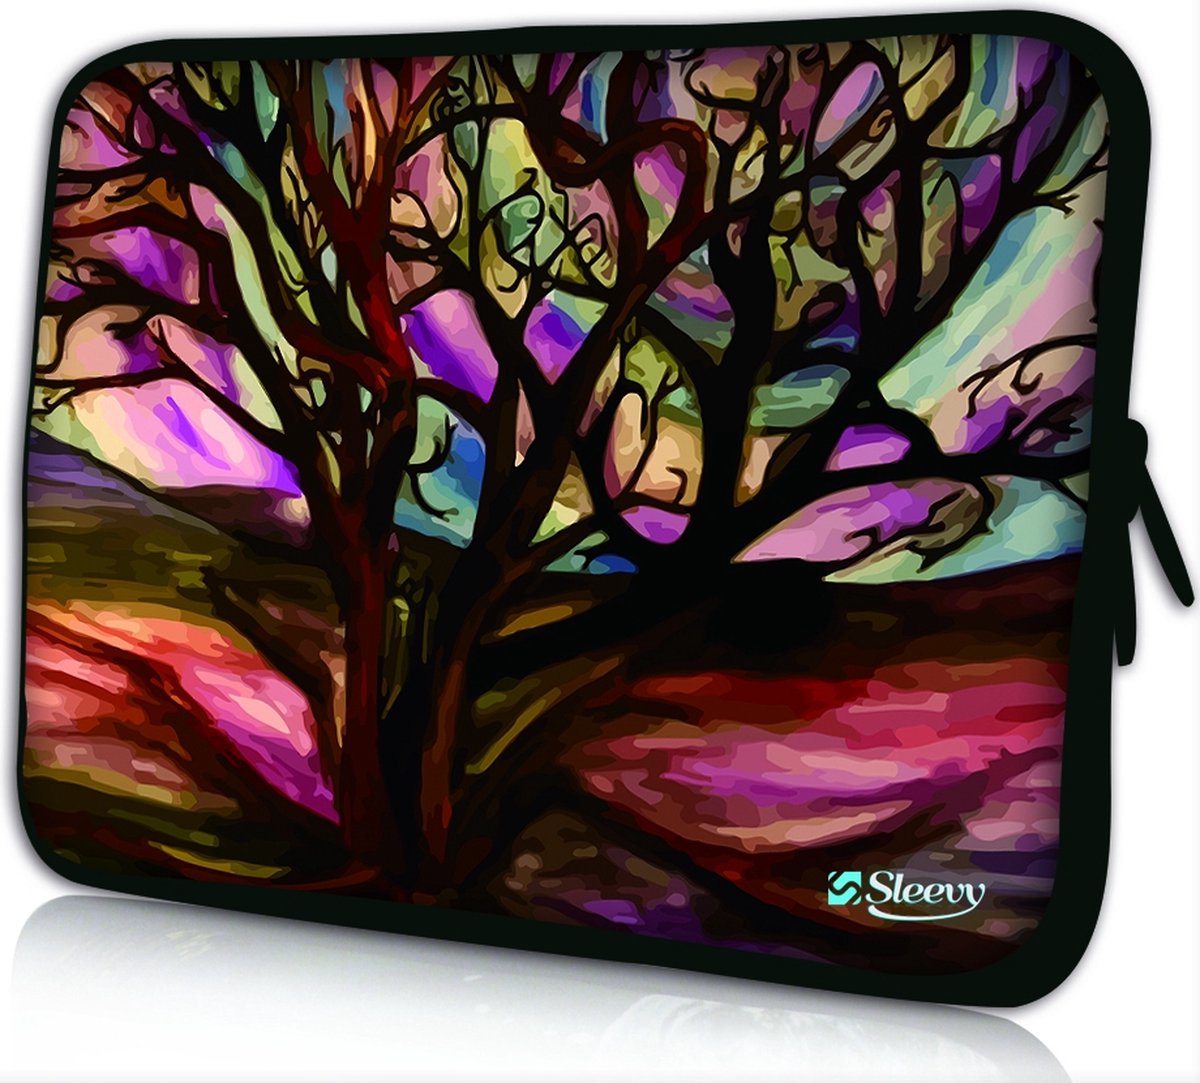 Sleevy 15,6 inch laptophoes kunst design - laptop sleeve - Sleevy collectie 300+ designs